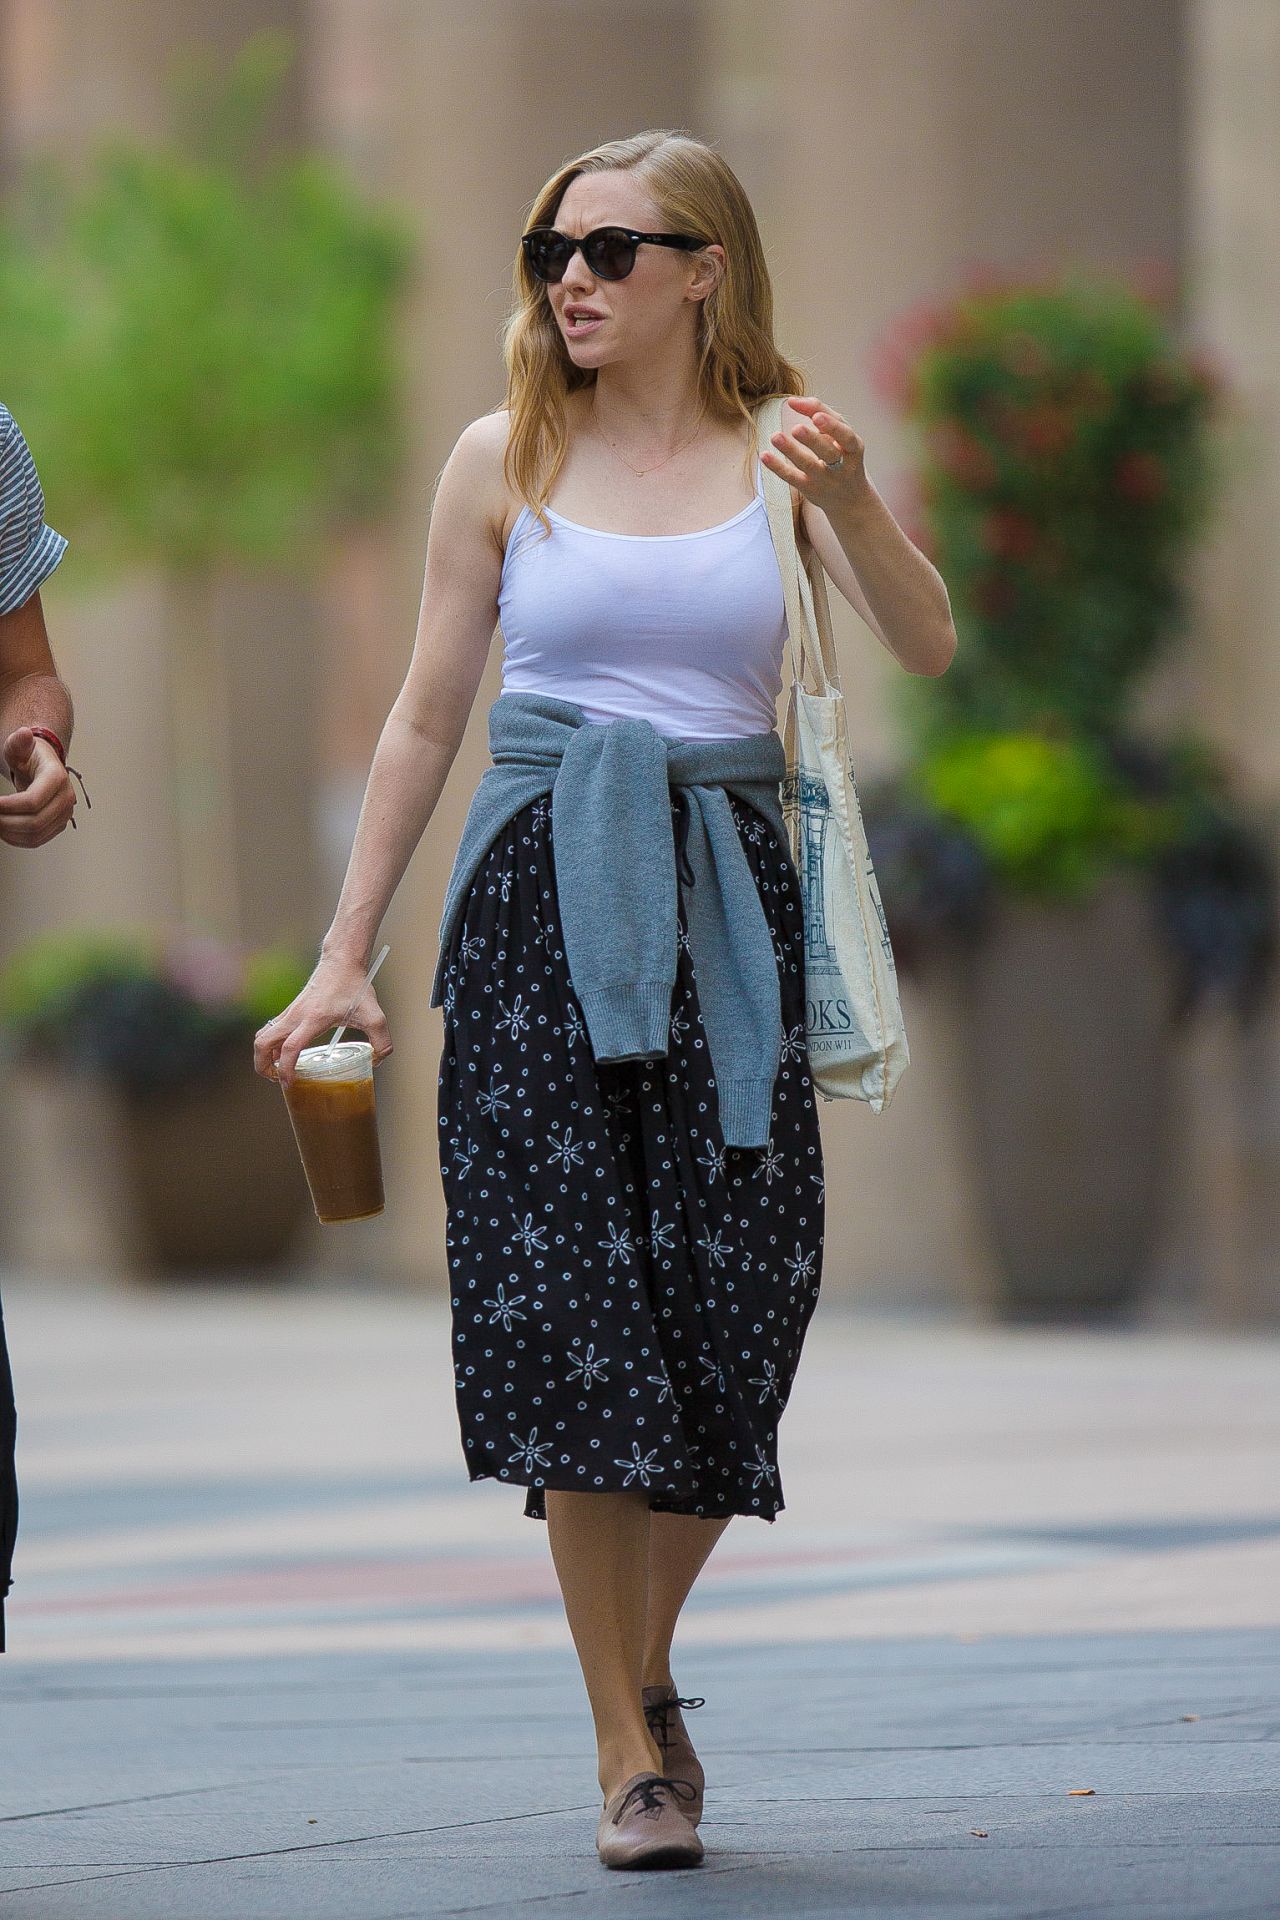 Amanda Seyfield Street Style - Out in Boston, August 2014